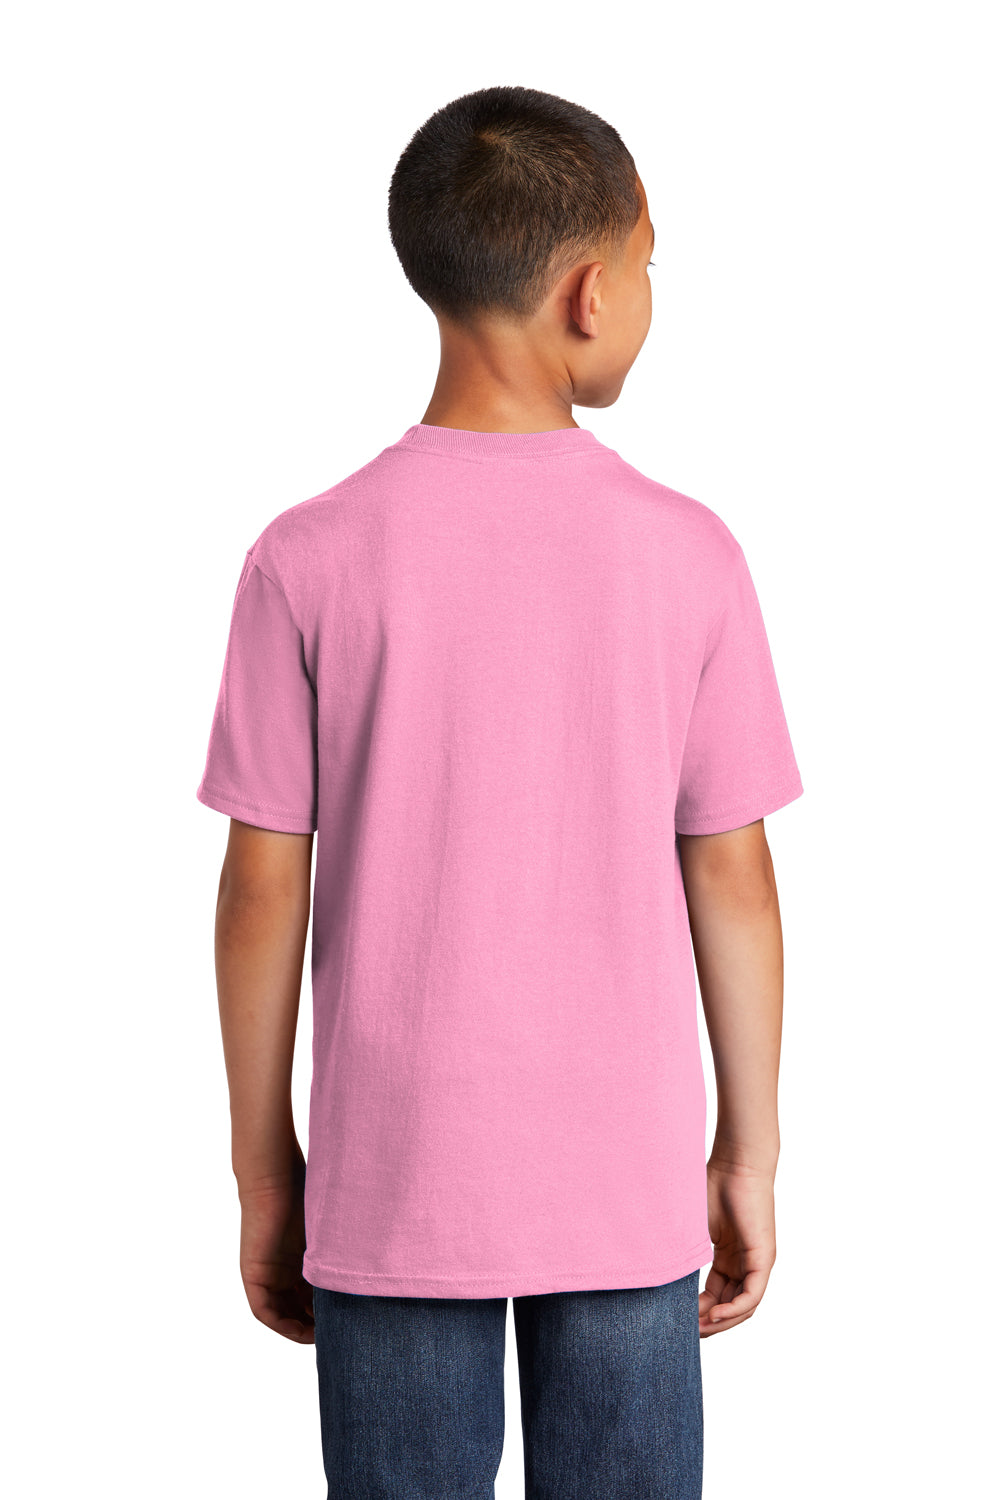 Port & Company PC54Y Youth Core Short Sleeve Crewneck T-Shirt Candy Pink Back